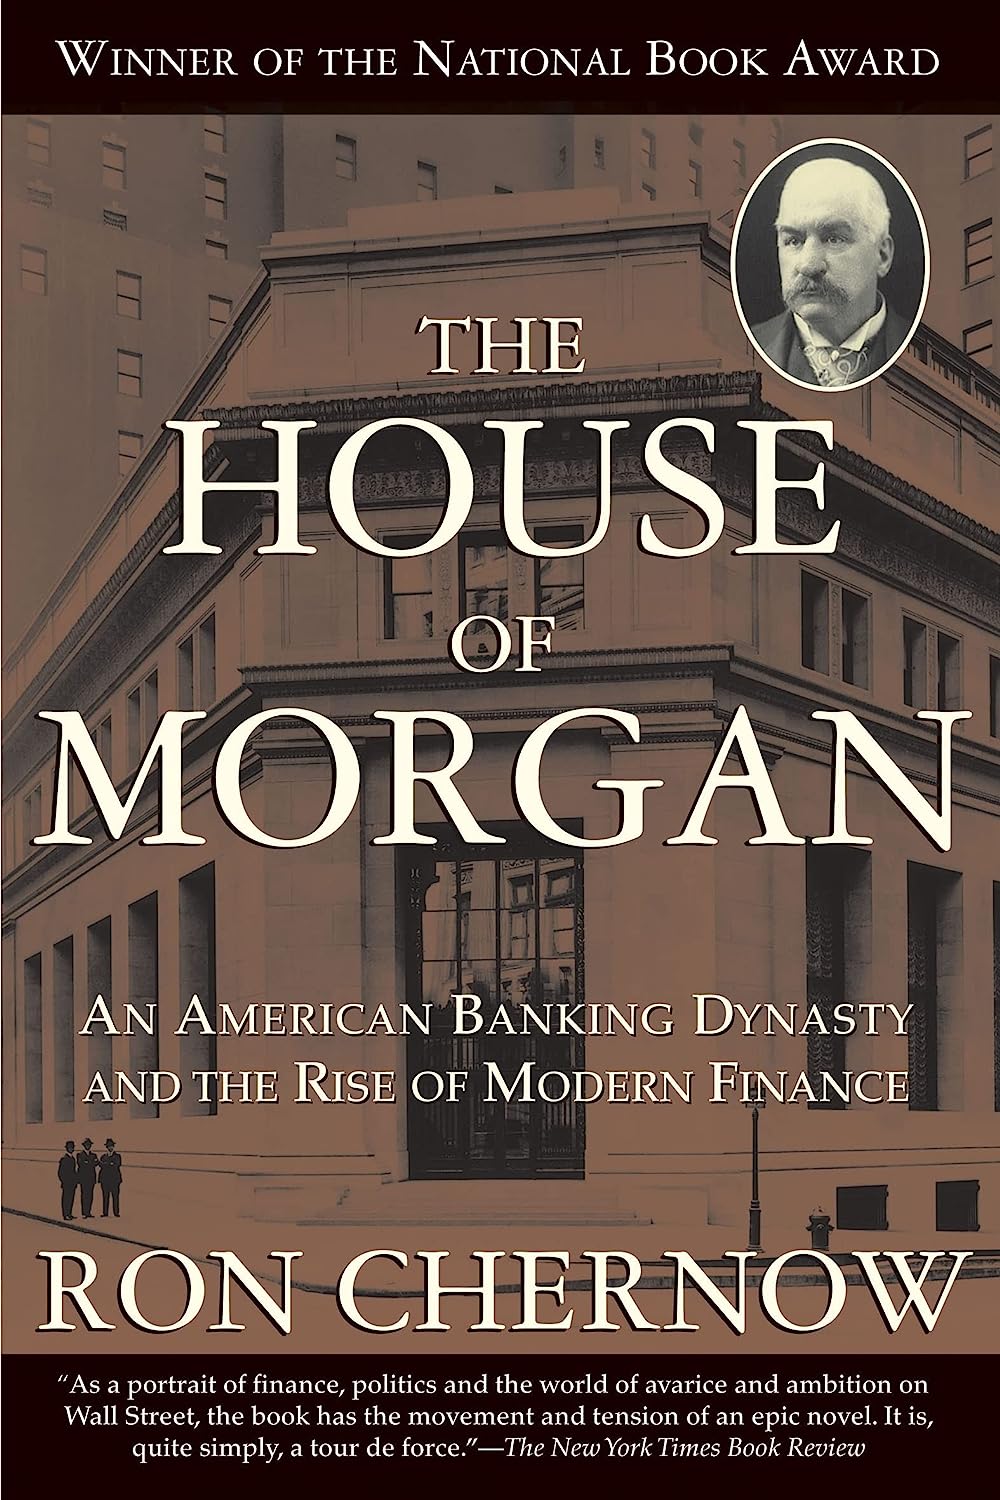 The House of Morgan: An American Banking Dynasty and the Rise of Modern Finance (Kindle eBook) $1.99